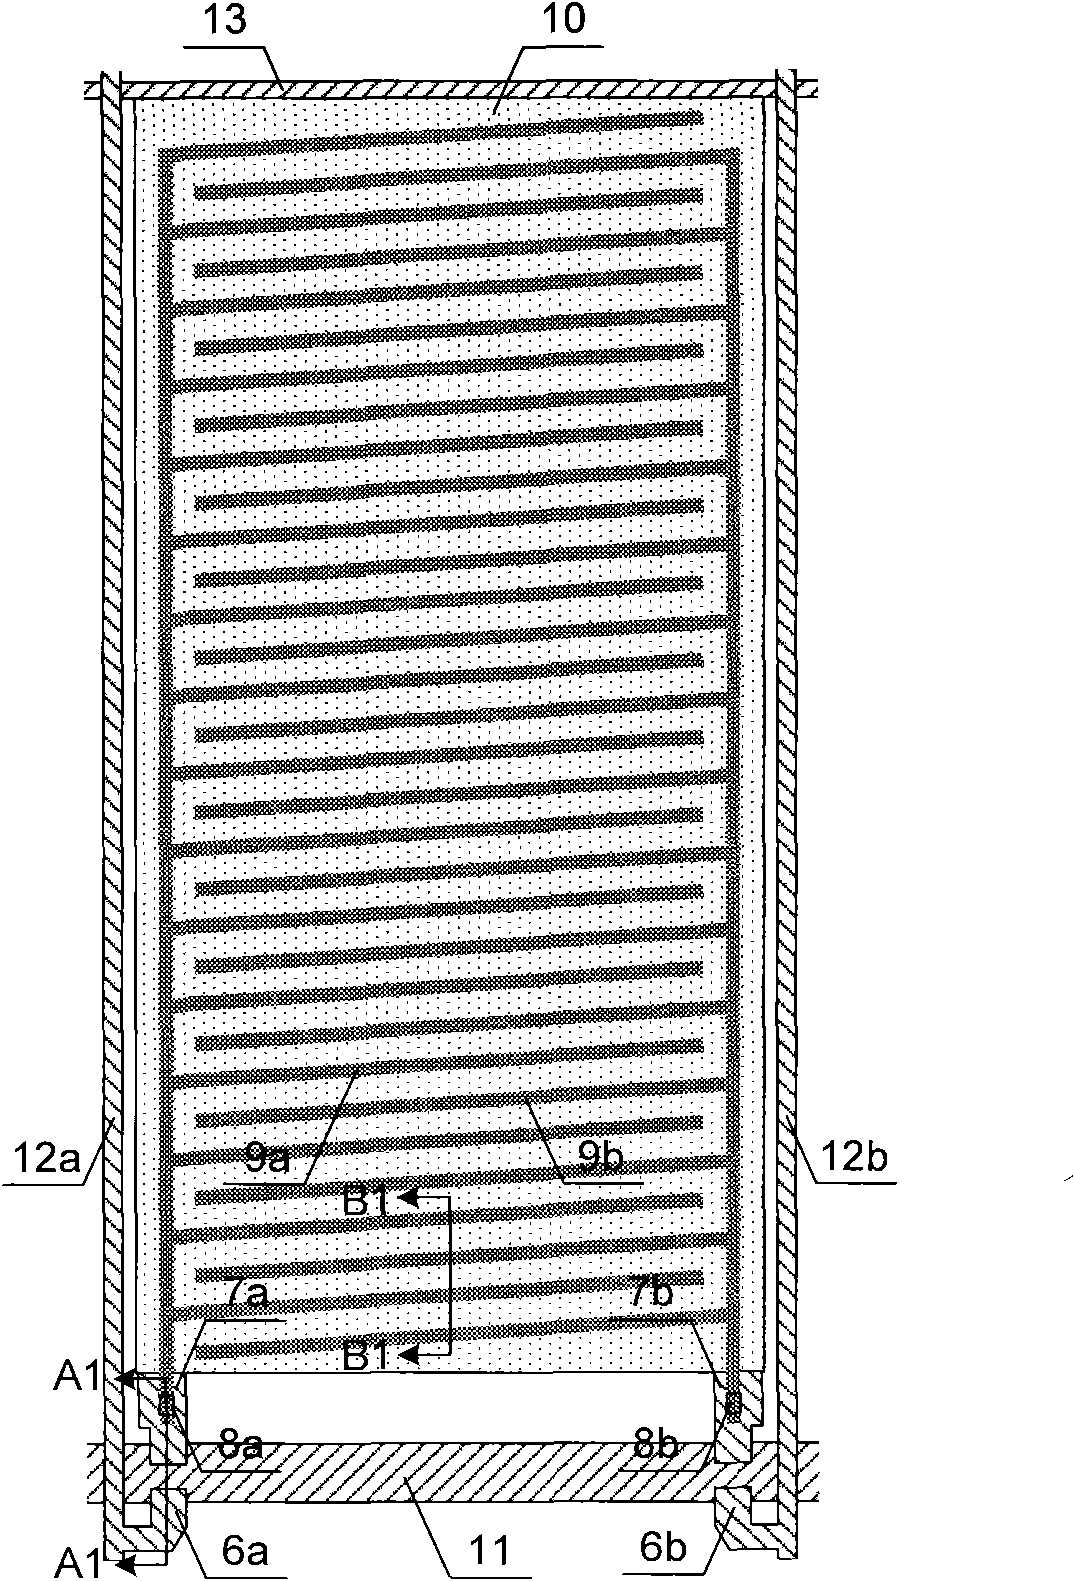 FFS (Free Fall Sensor) type TFT-LCD (Thin Film Transistor-Liquid Crystal Display) array substrate and manufacture method thereof